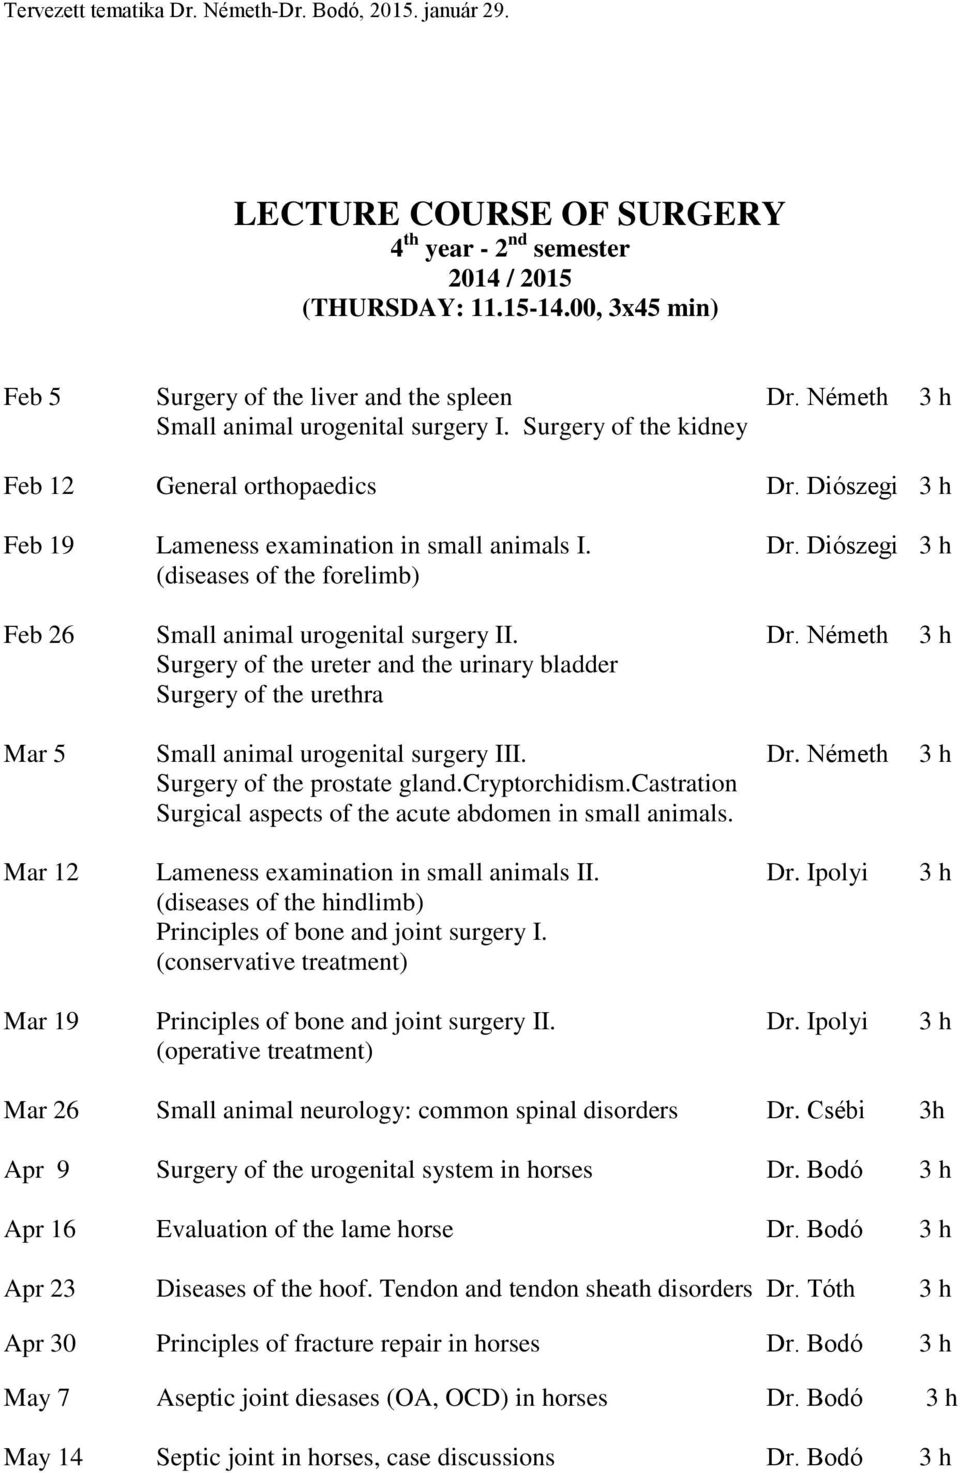 Dr. Németh 3 h Surgery of the ureter and the urinary bladder Surgery of the urethra Mar 5 Small animal urogenital surgery III. Dr. Németh 3 h Surgery of the prostate gland.cryptorchidism.